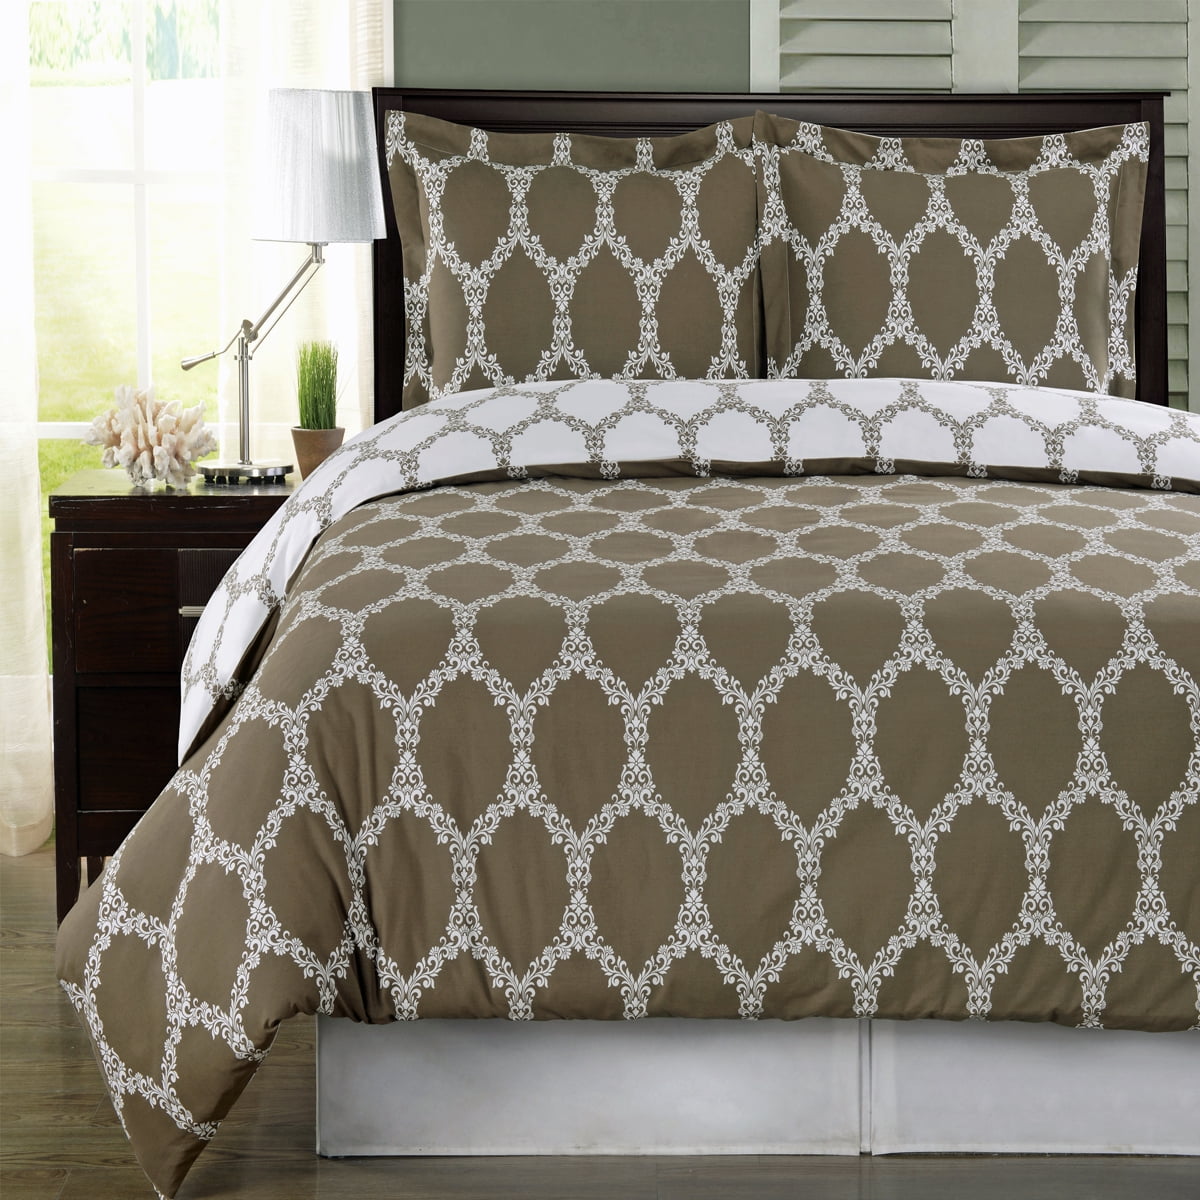 Queen Swanson Beddings Leafy Vines 3-Piece 100% Cotton Bedding Set COMIN18JU053980 Duvet Cover and Two Pillow Shams